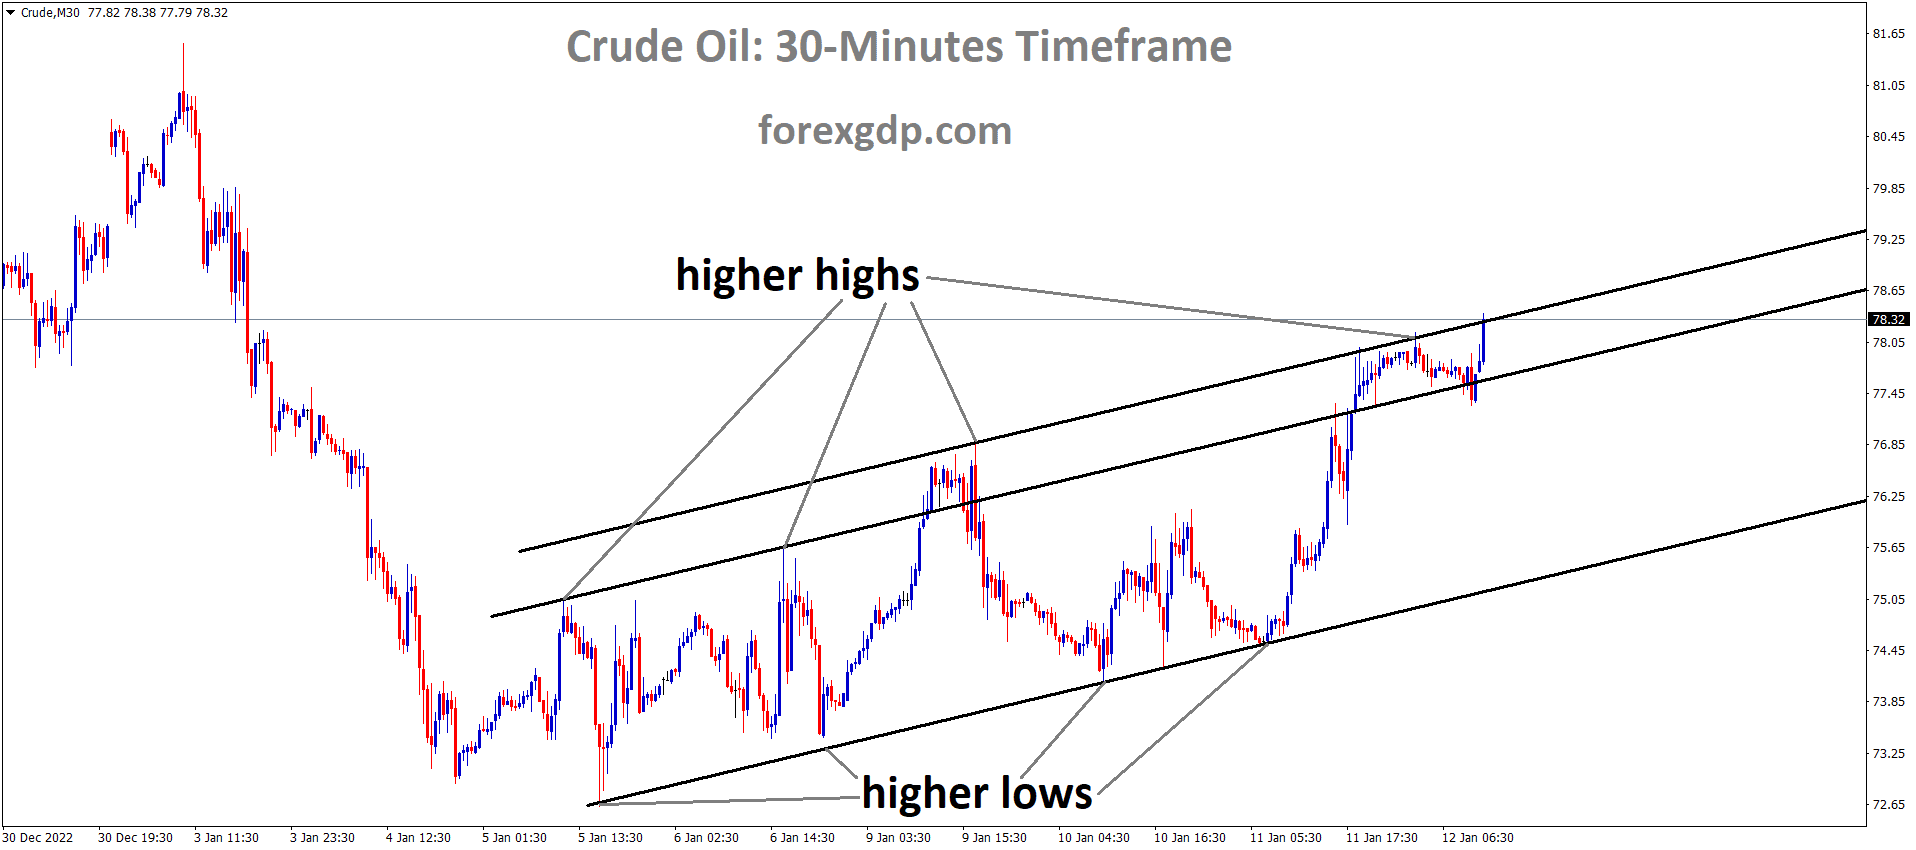 Crude oil is moving in an Ascending channel and the market has reached the higher high area of the channel